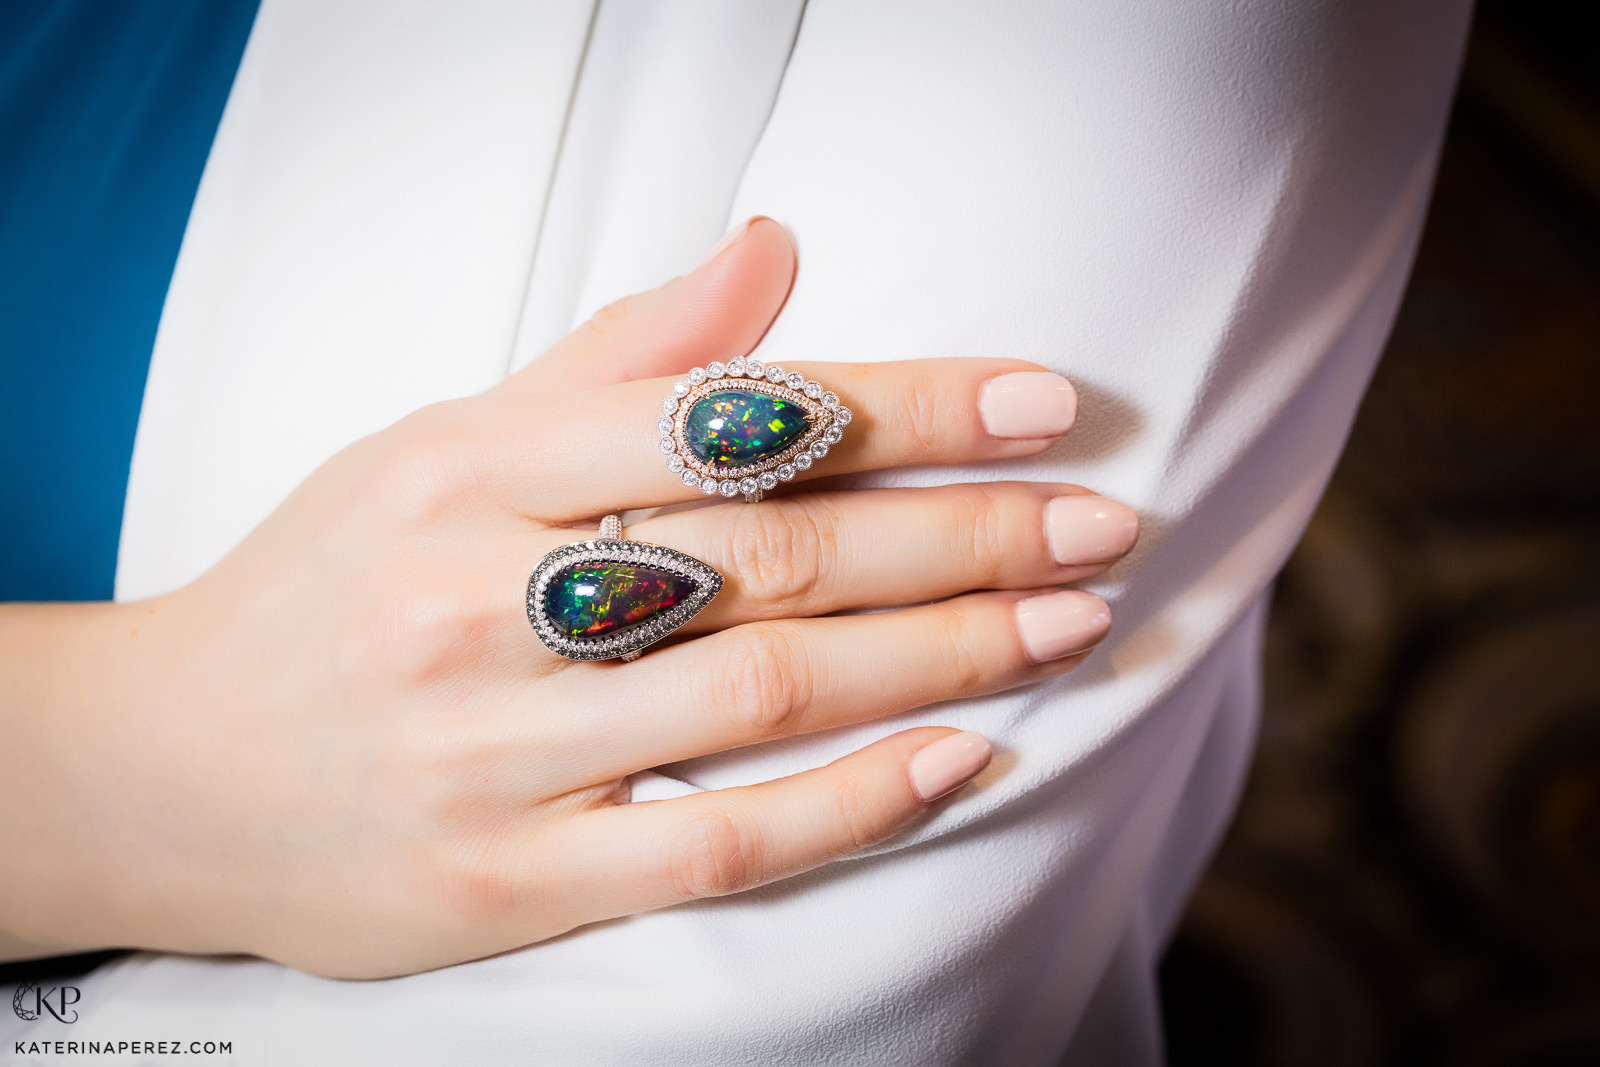 Yael Designs rings with pear-shaped 6.17 cts black opal and 5.69 cts black opal as well as diamonds. Photo by Simon Martner.